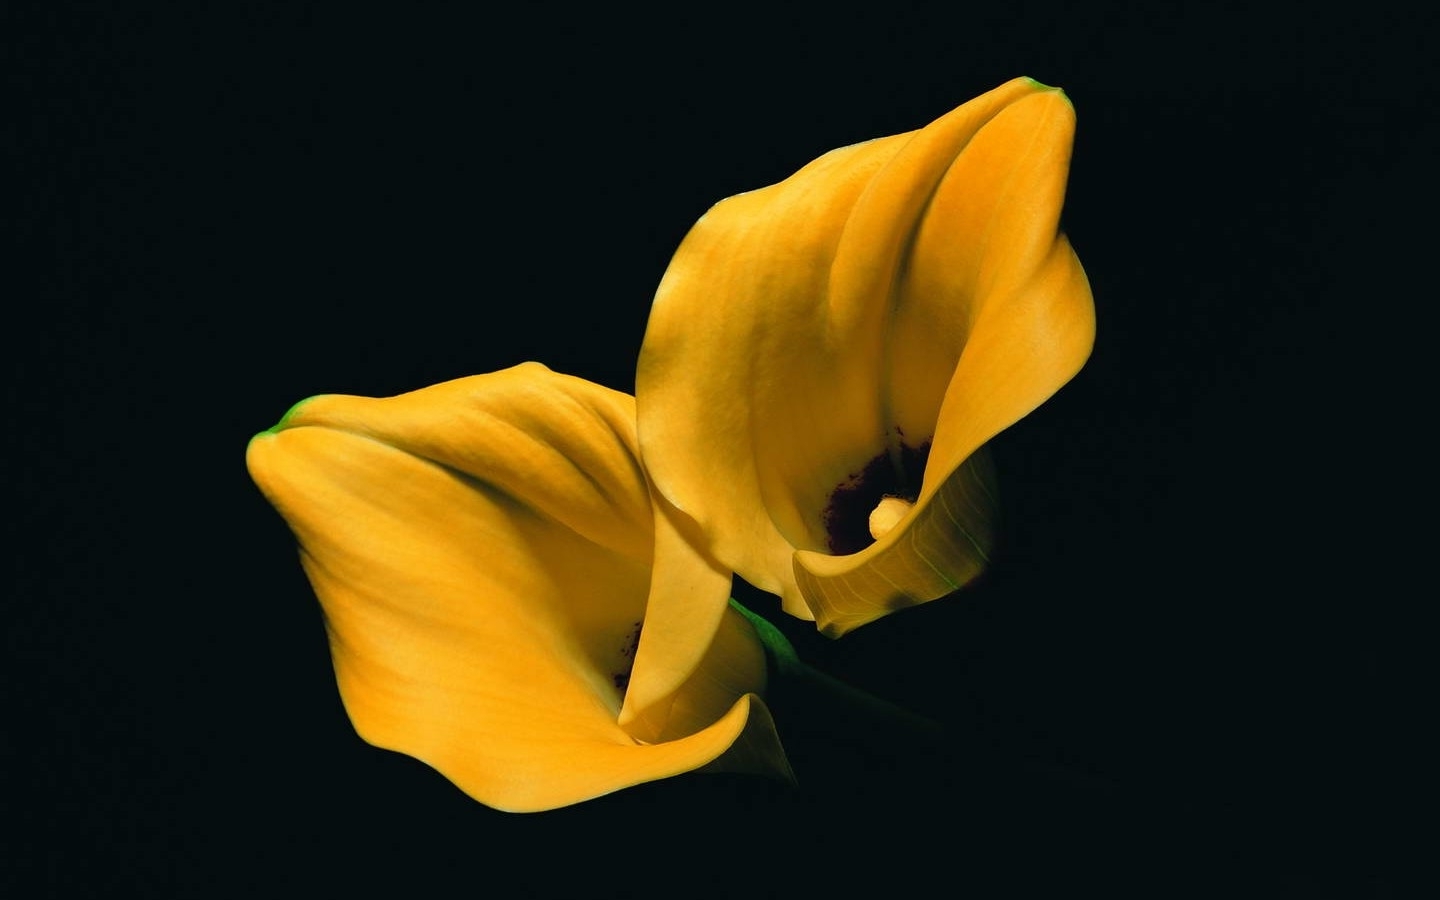 lilies, Yellow Flowers, Flowers, Black Background Wallpaper